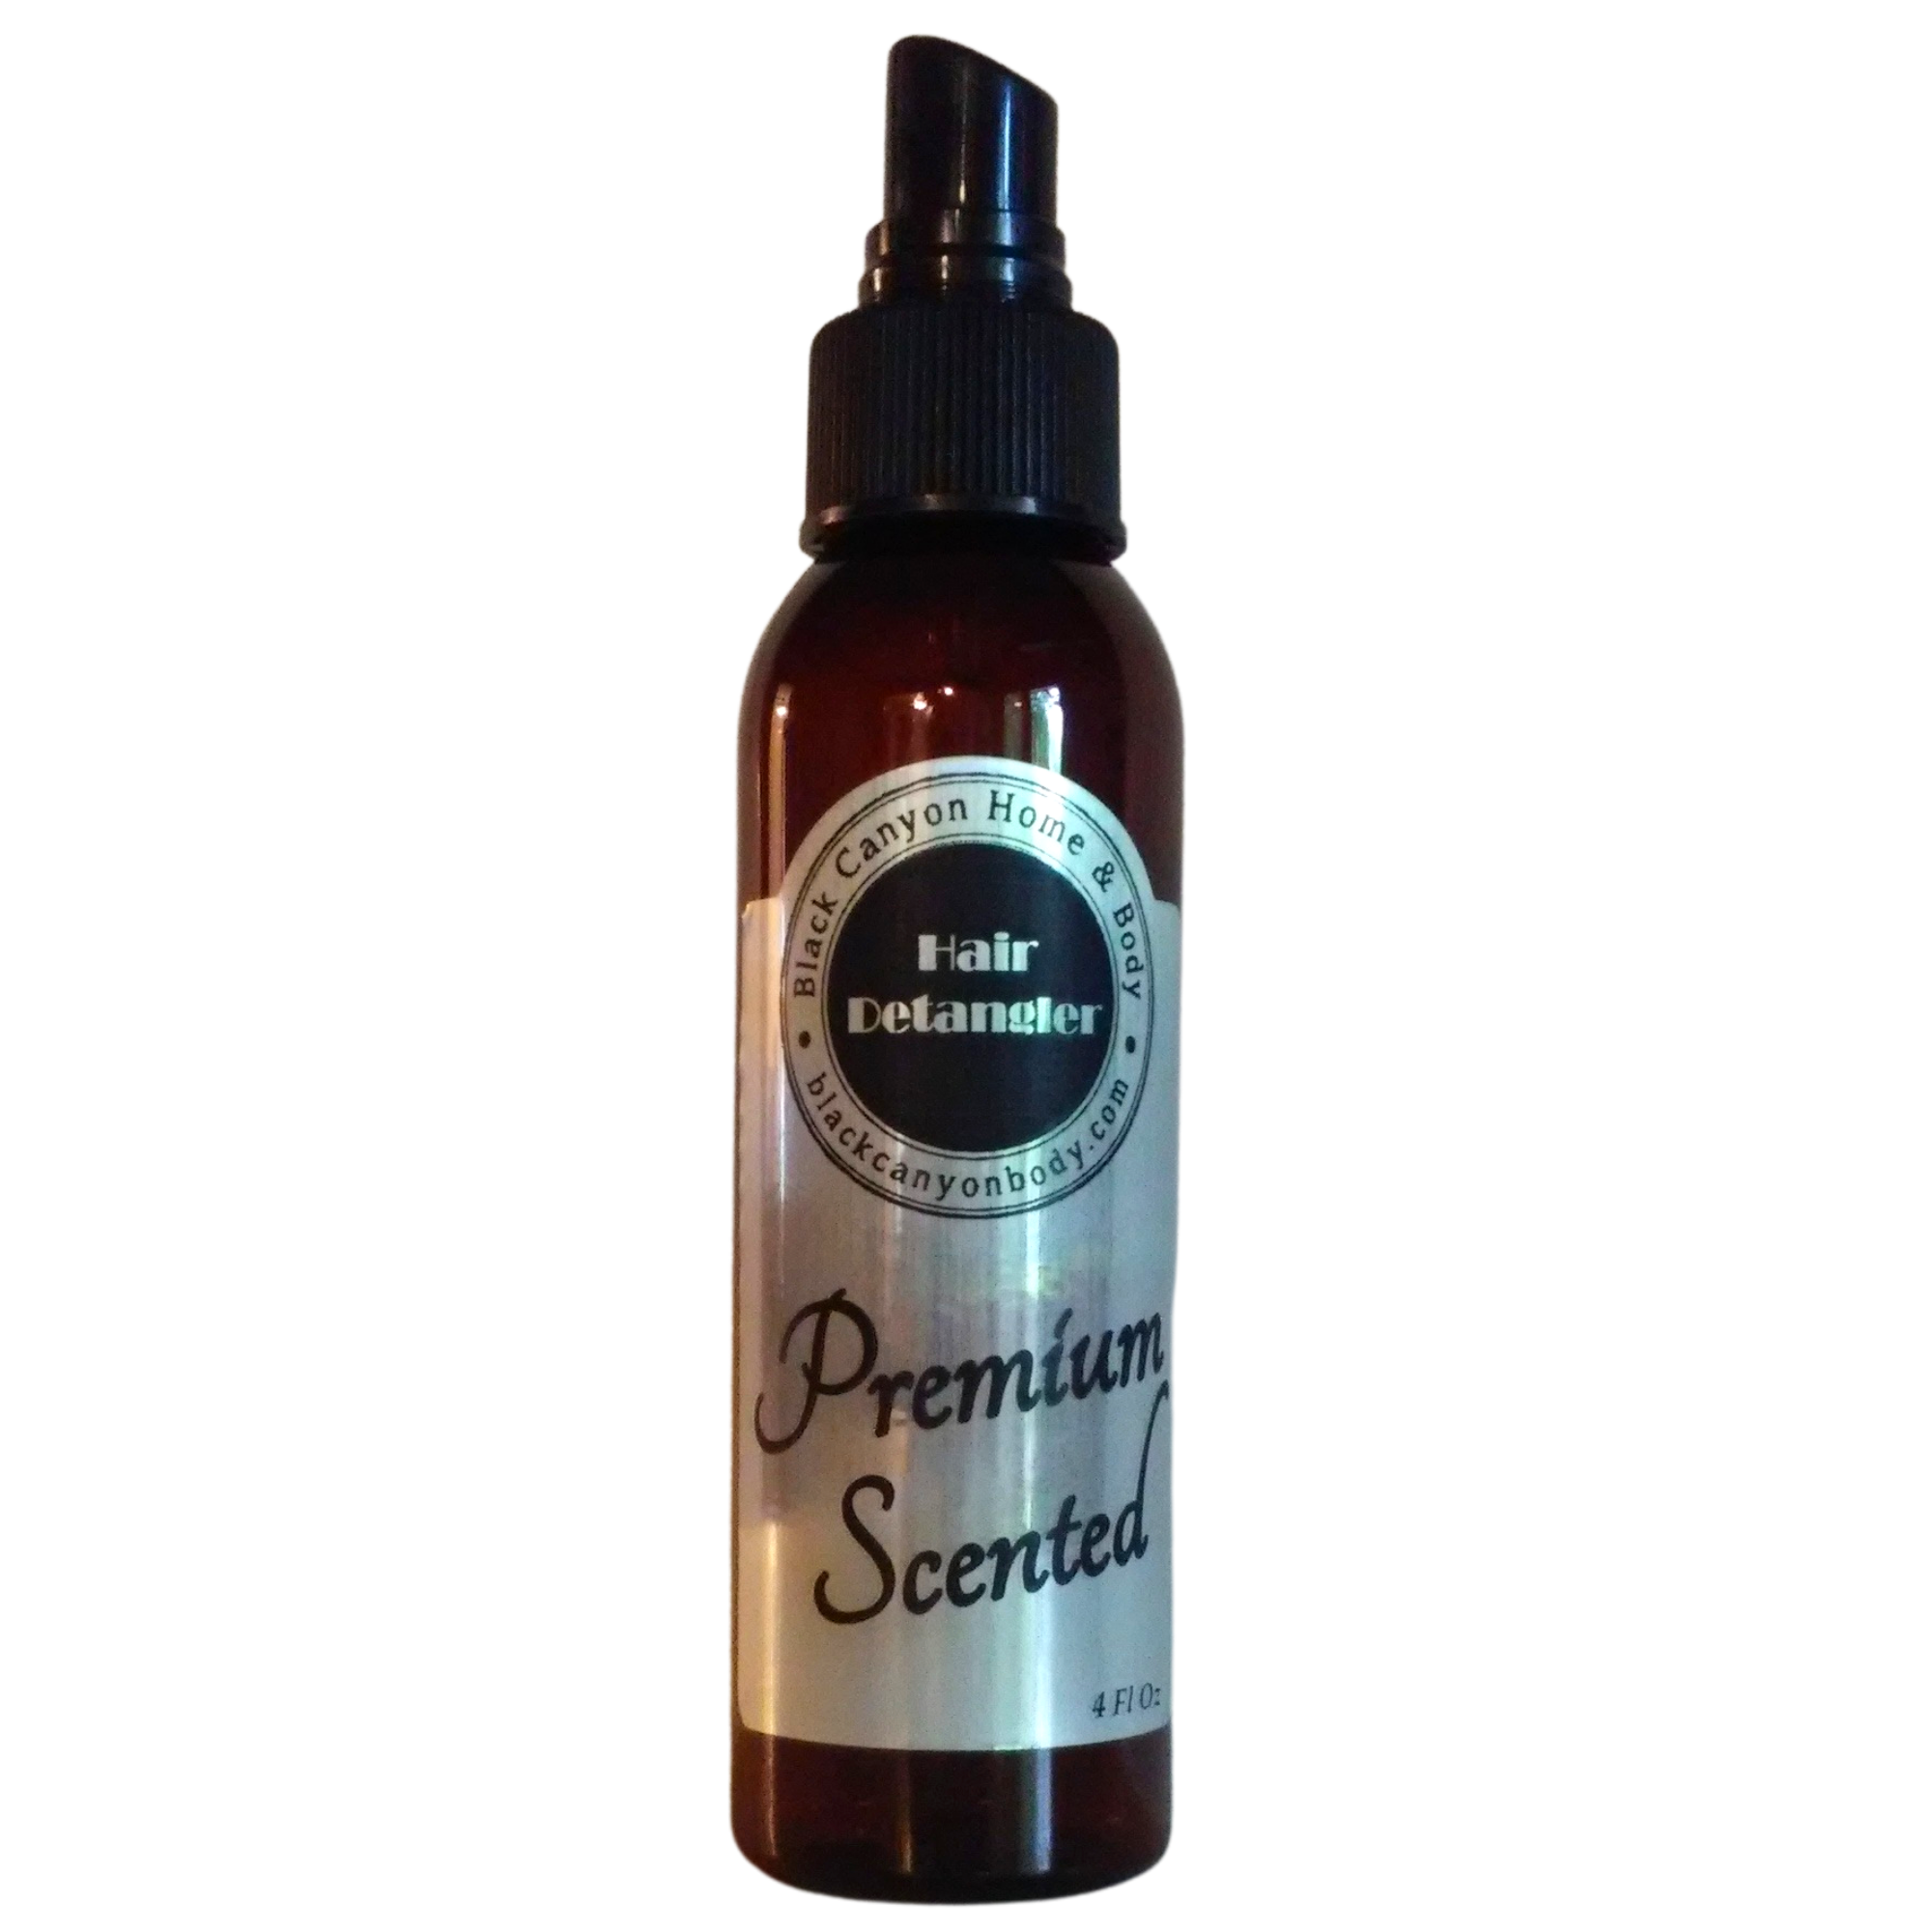 Black Canyon Berry Peach Scented Hair Detangler Spray with Olive Oil